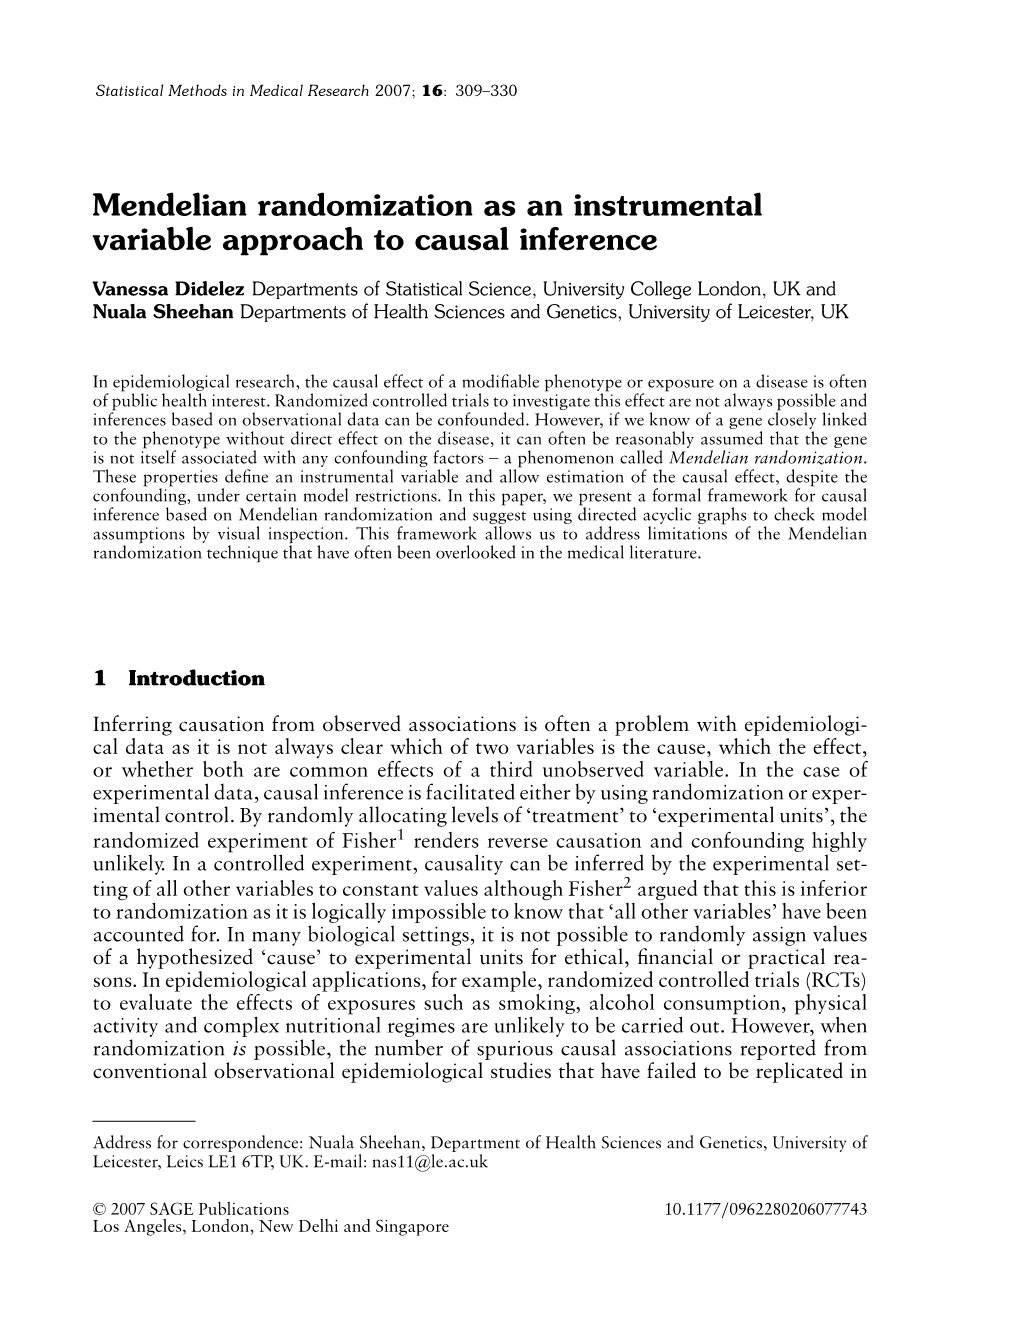 Mendelian Randomization As an Instrumental Variable Approach to Causal Inference